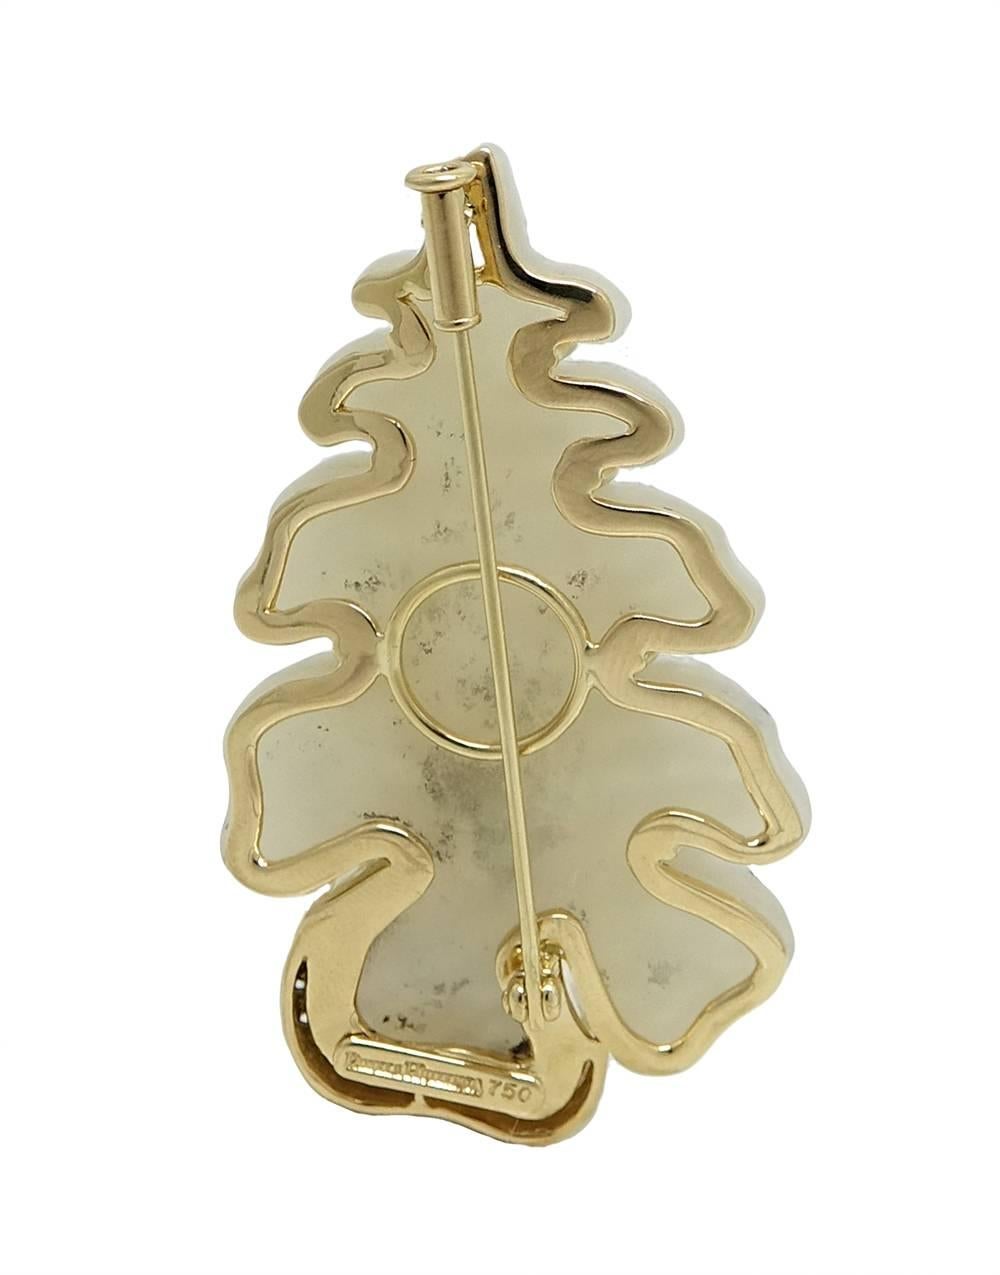 This Contemporary 18K Yellow Gold Pamela Huizenga Leaf Brooch Has Natural Druse Agate Weighing A Total Carat Weight Of 41.21 Carats. Diamond Accents Add A Bit More Sparkle To This Brooch and Weigh A Total Carat Weight Of .37 Carats. This Whimsical